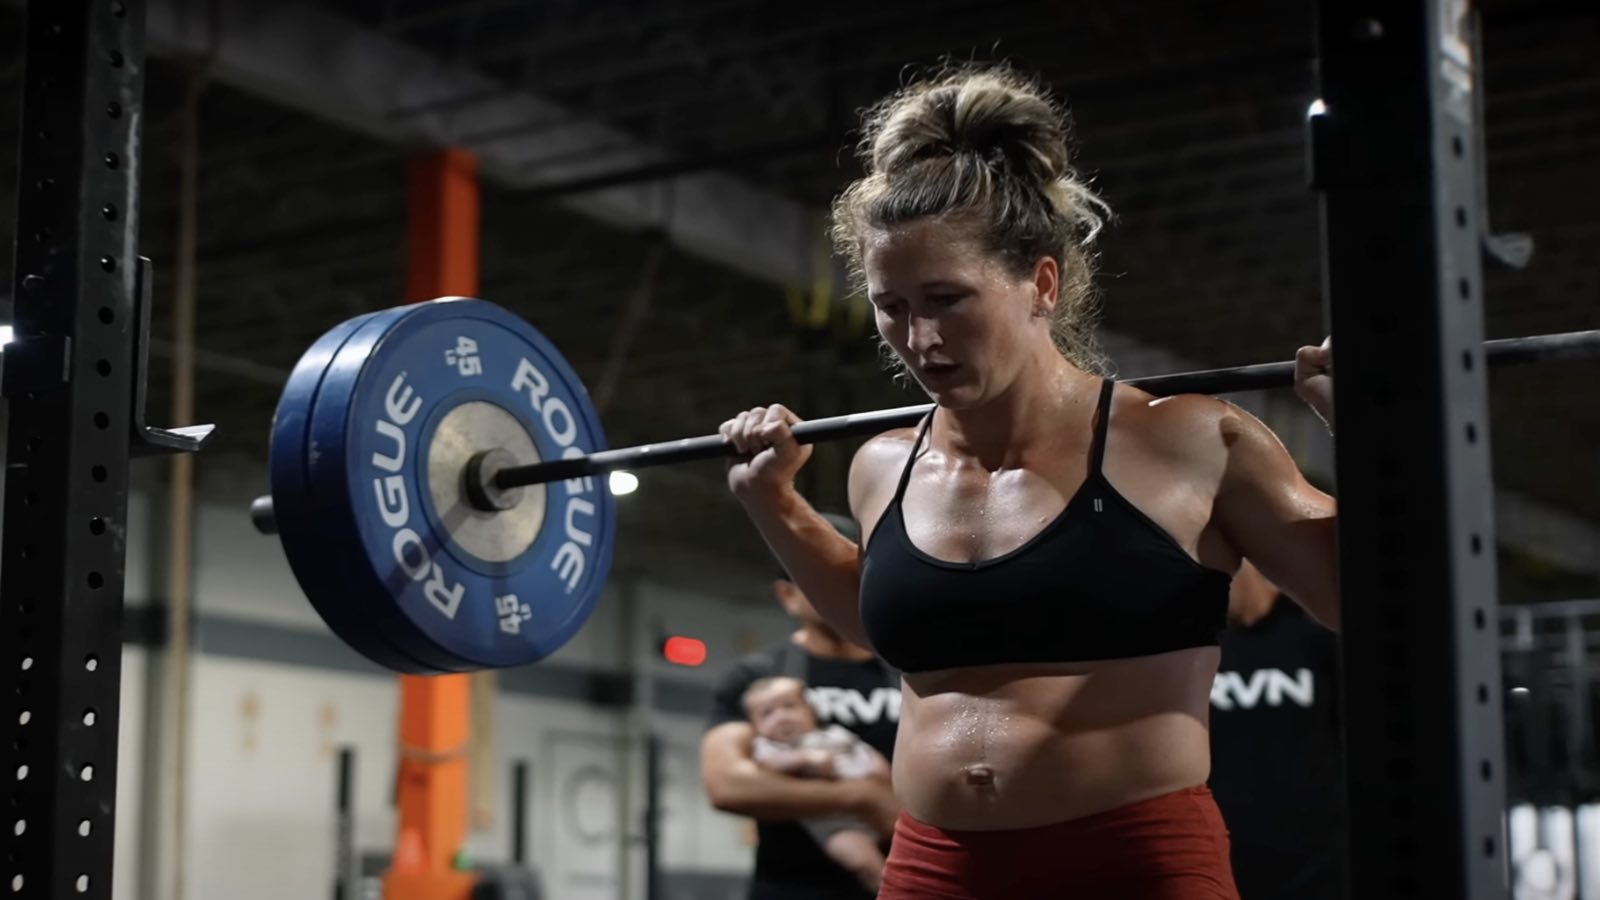 Tia-Clair Toomey Continues Comeback With Full Day of Training